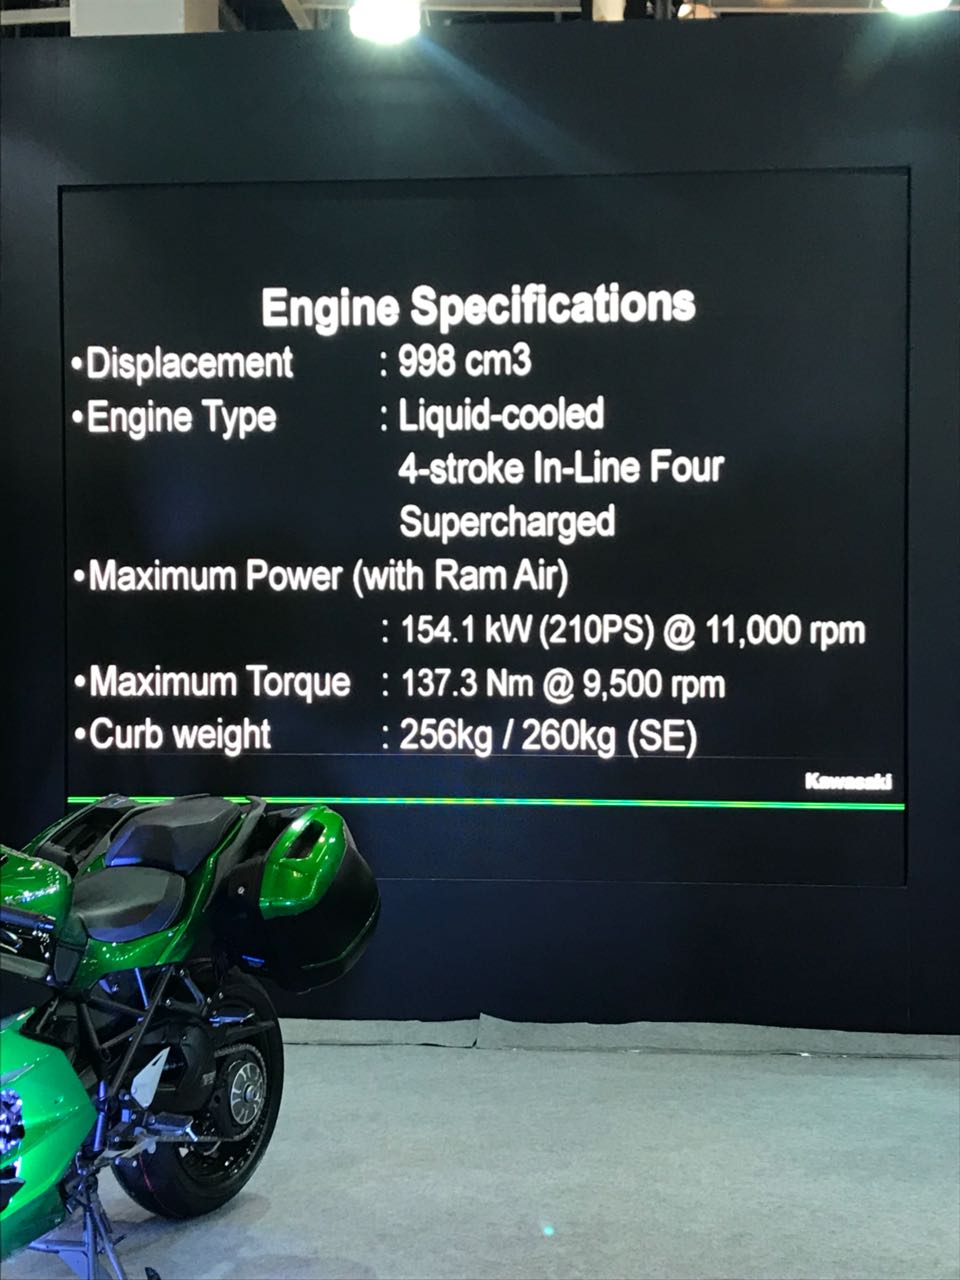 <p>Here are the engine specifications of the Kawasaki Vulcan S&nbsp;</p>